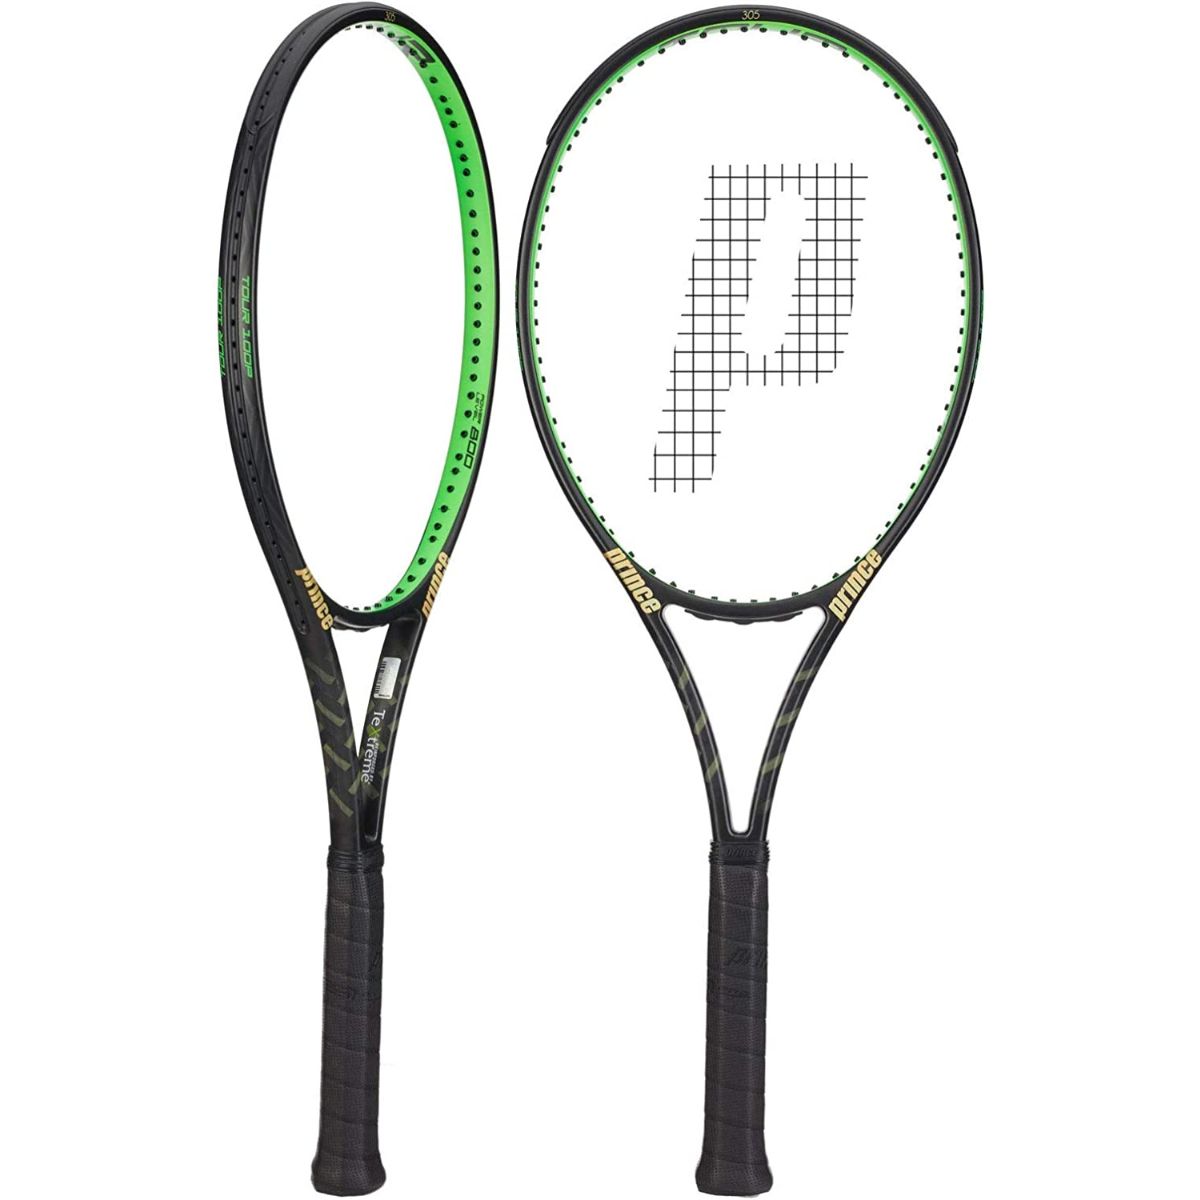 The Best Tennis Rackets for Control Options: Prince Textreme Tour 100P